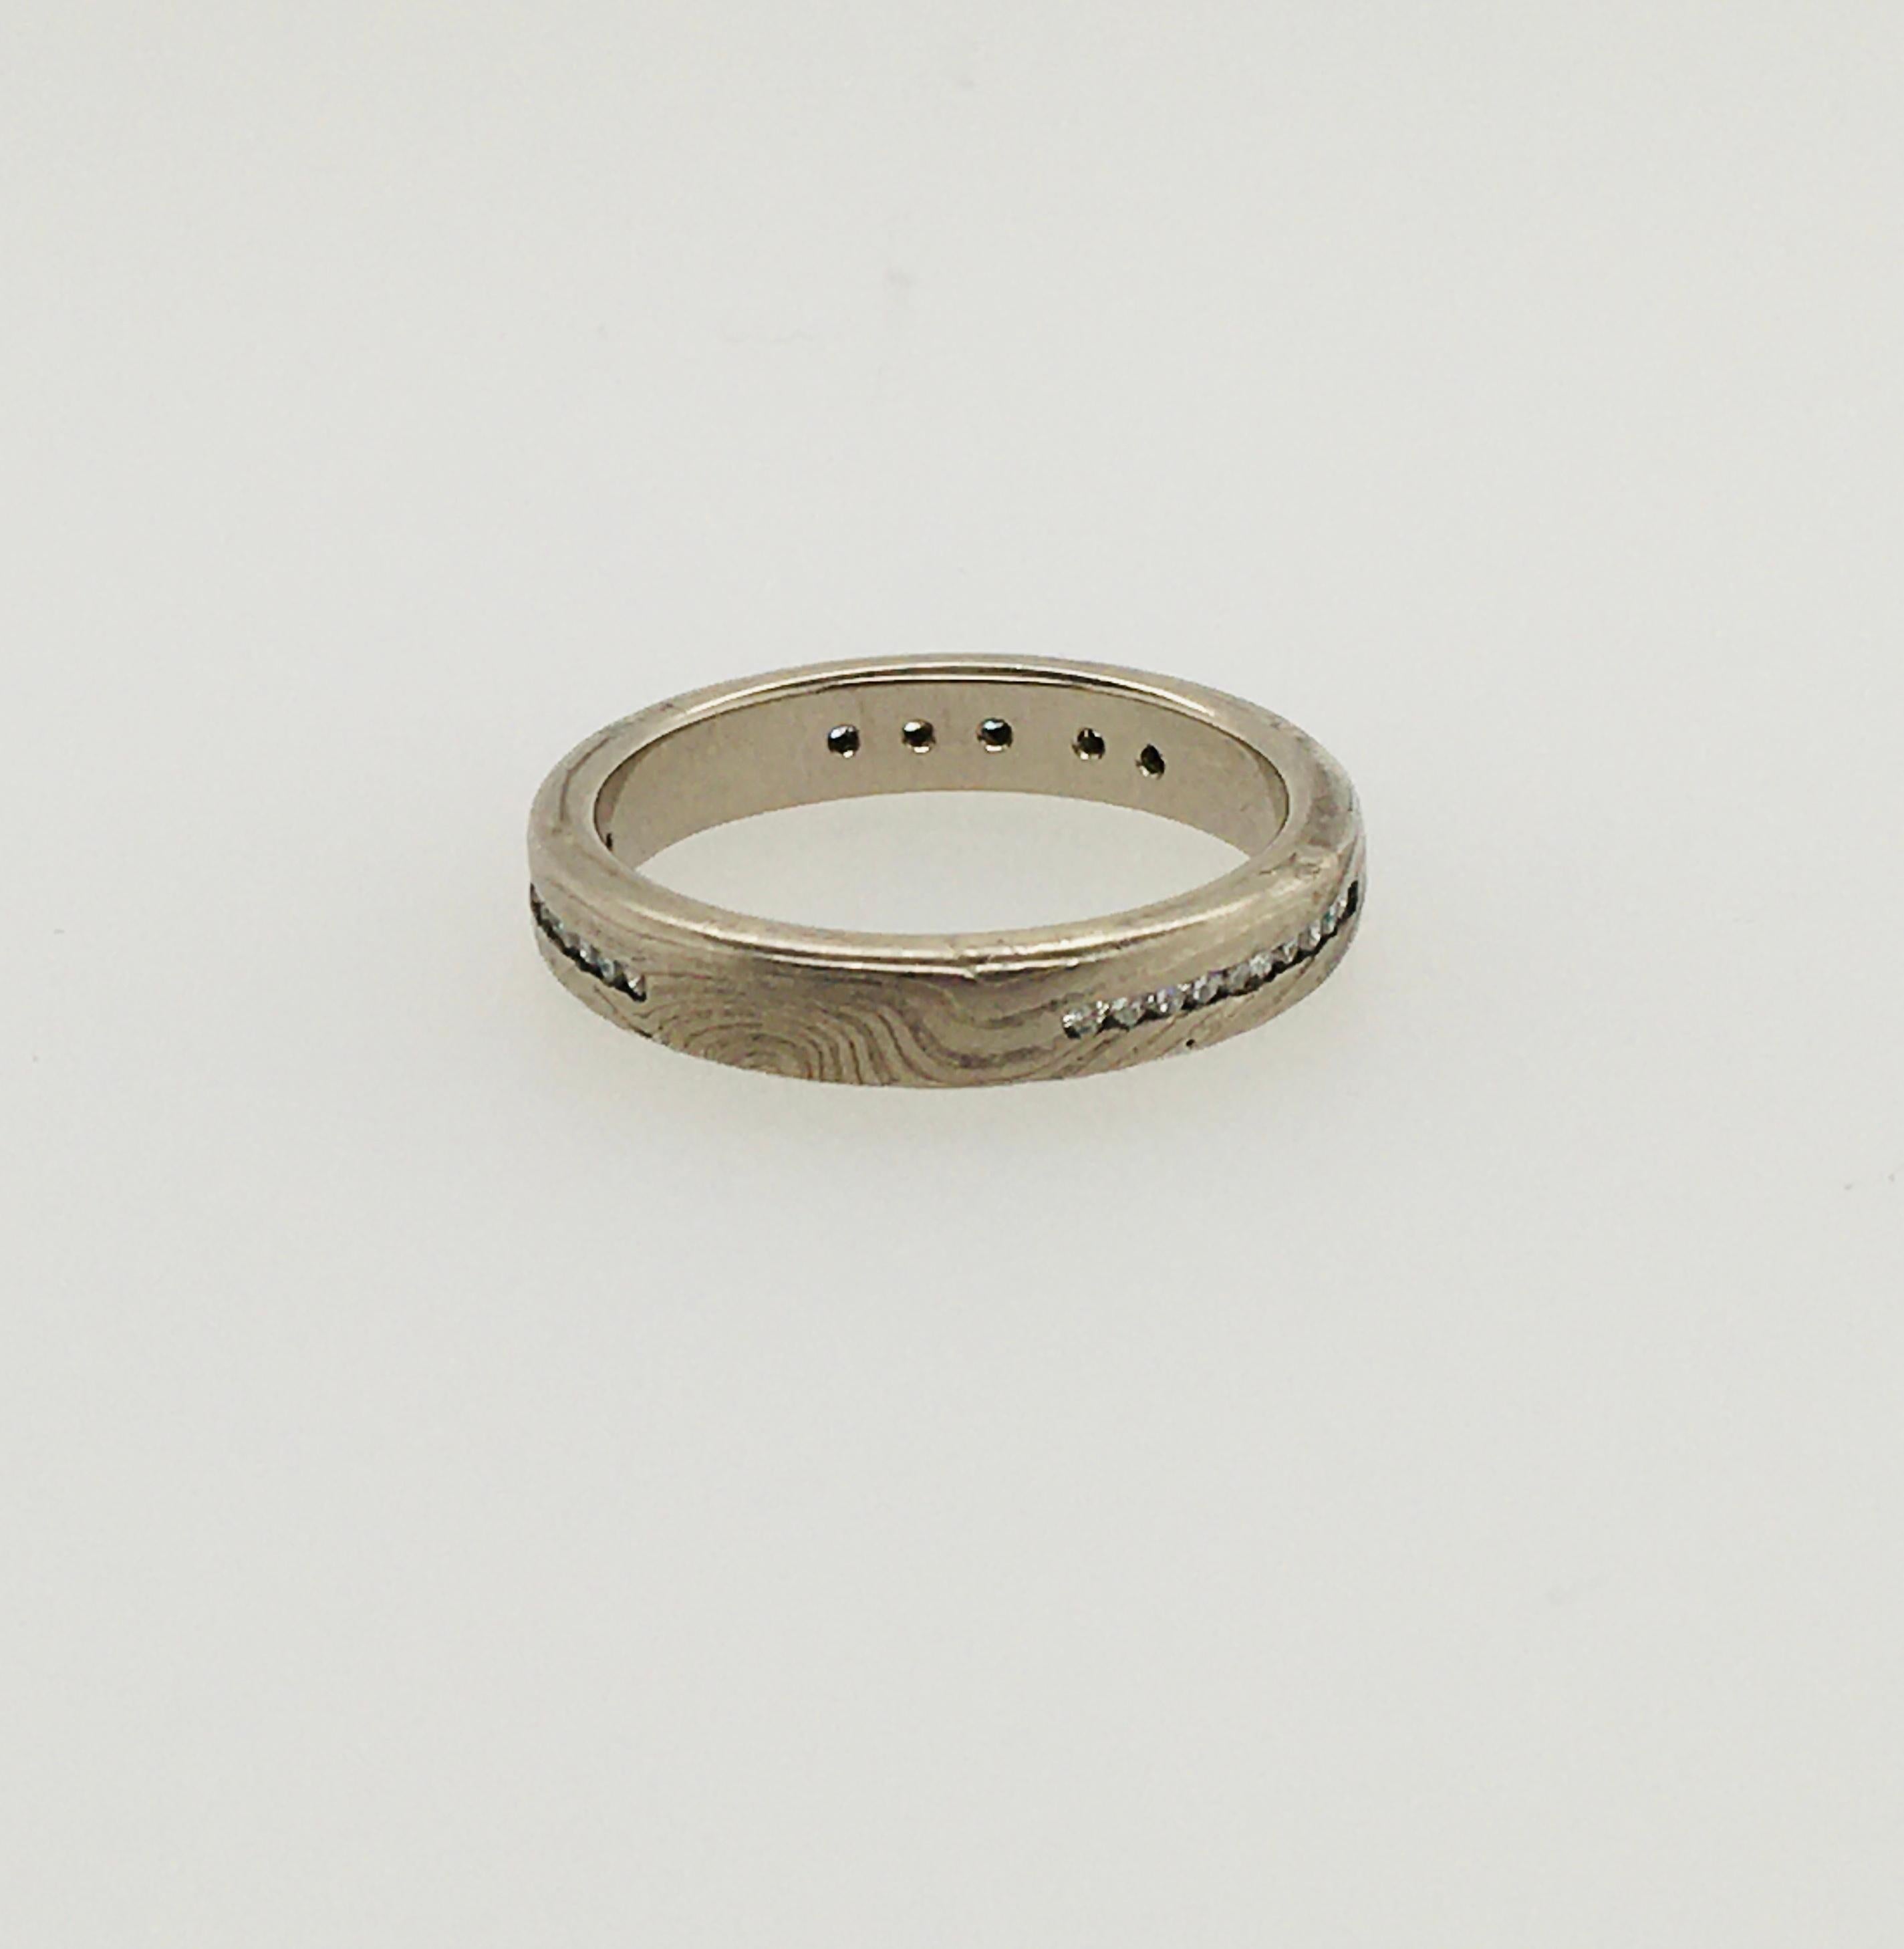 A striking George Sawyer 3.6 mm 14K gray gold and etched sterling silver flat band in the distinctive Mokume style. The ring features 3 channels of 10 round diamonds, each set in 14KW gold, .14 TCW.   Interior stamp reads 